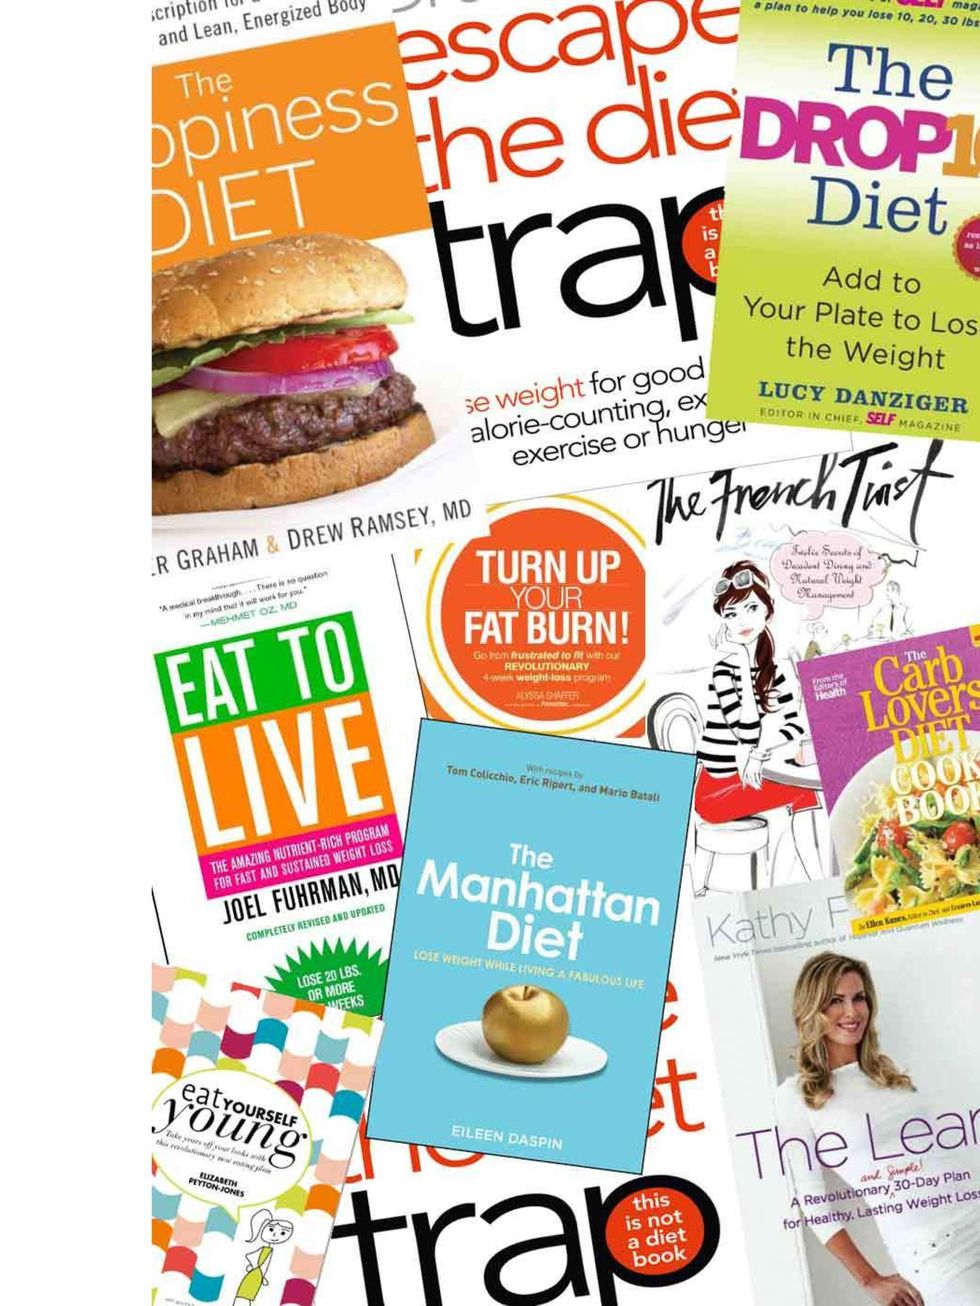 <p>The recent sunny weather has made the fast-approaching summer season seem all too real. If you want to drop a few pounds before bikini time, then help is at hand with the plethora of new diet books launching this spring. To really reap the benefits, fi